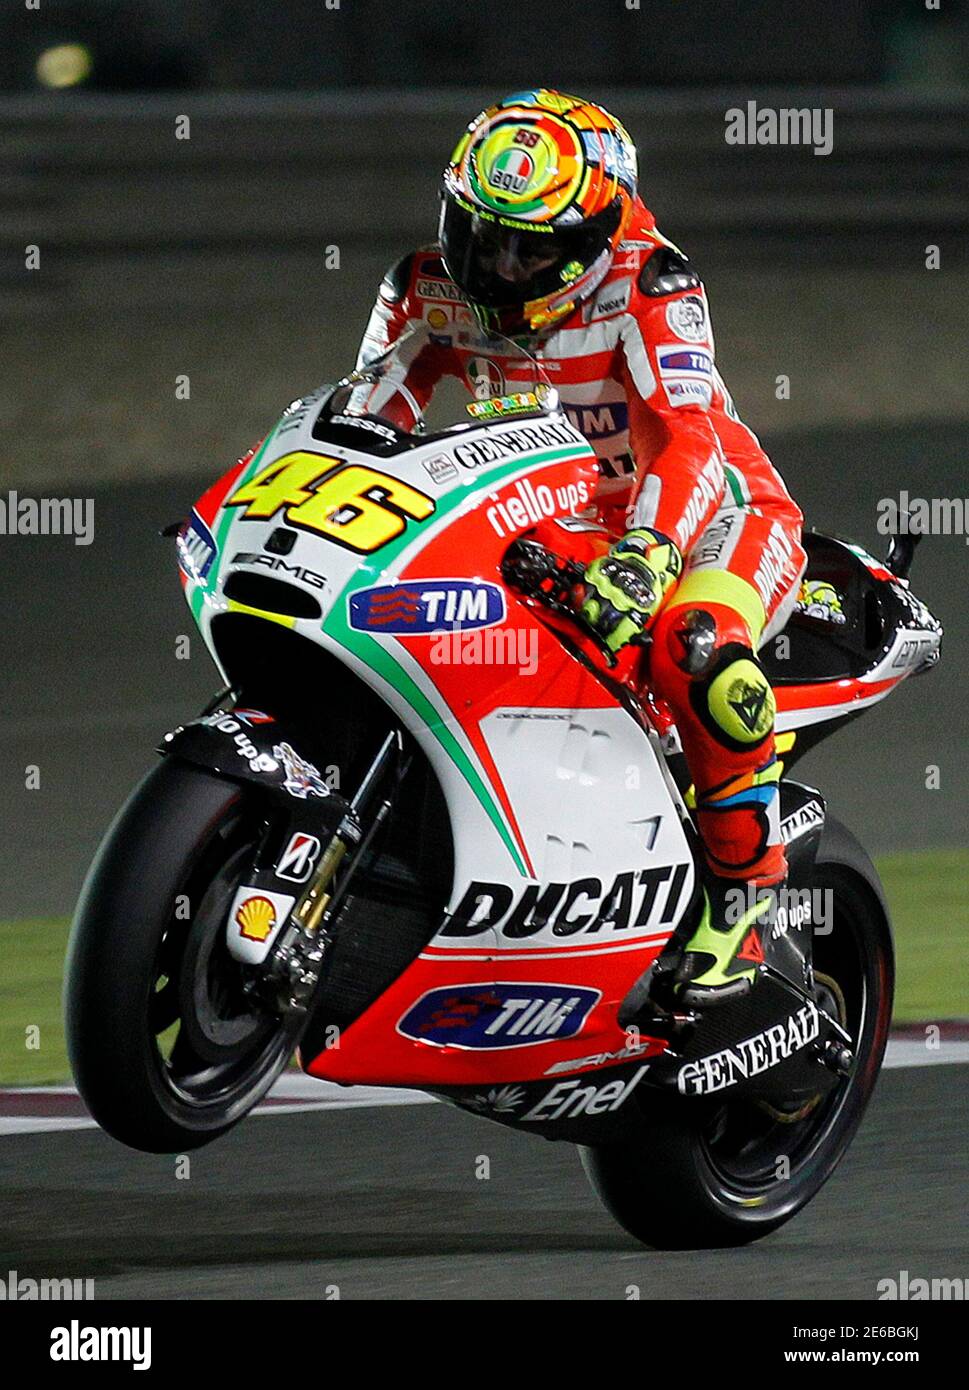 Ducati MotoGP rider Valentino Rossi of Italy does a wheelie during a free  practice session of the Qatar MotoGP Grand Prix at the Losail International  circuit in Doha April 6, 2012. REUTERS/Mohammed